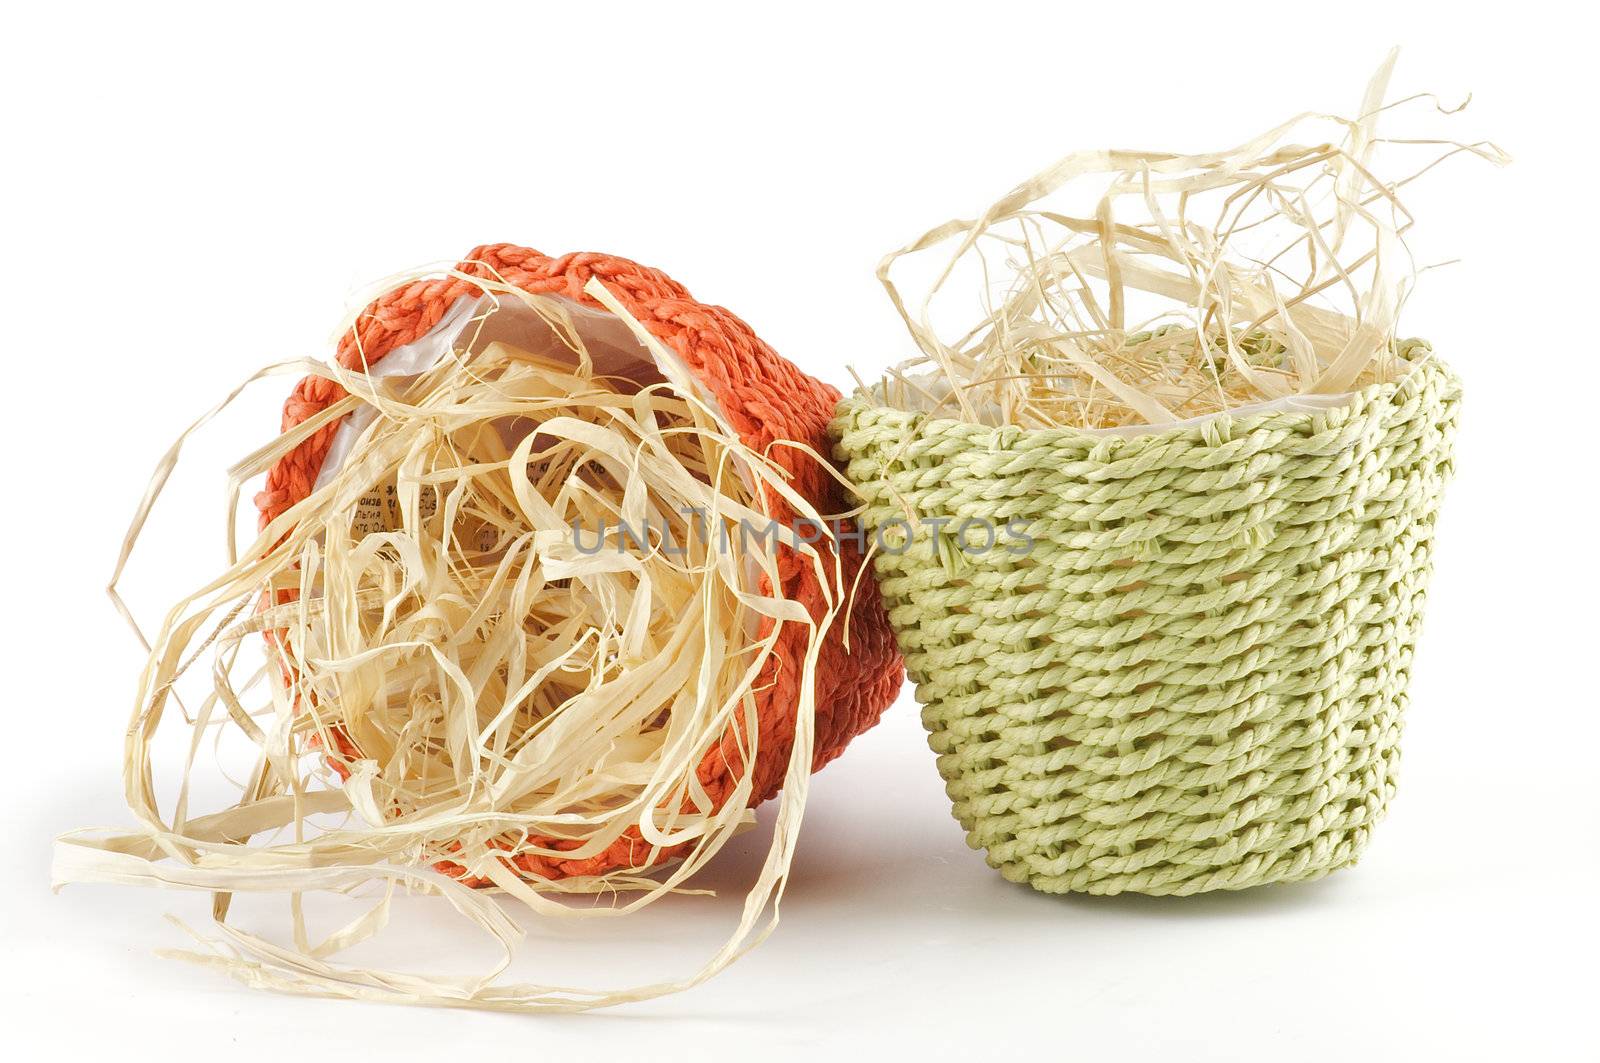 Green and red little wicker flower pots with straw isolated on white background